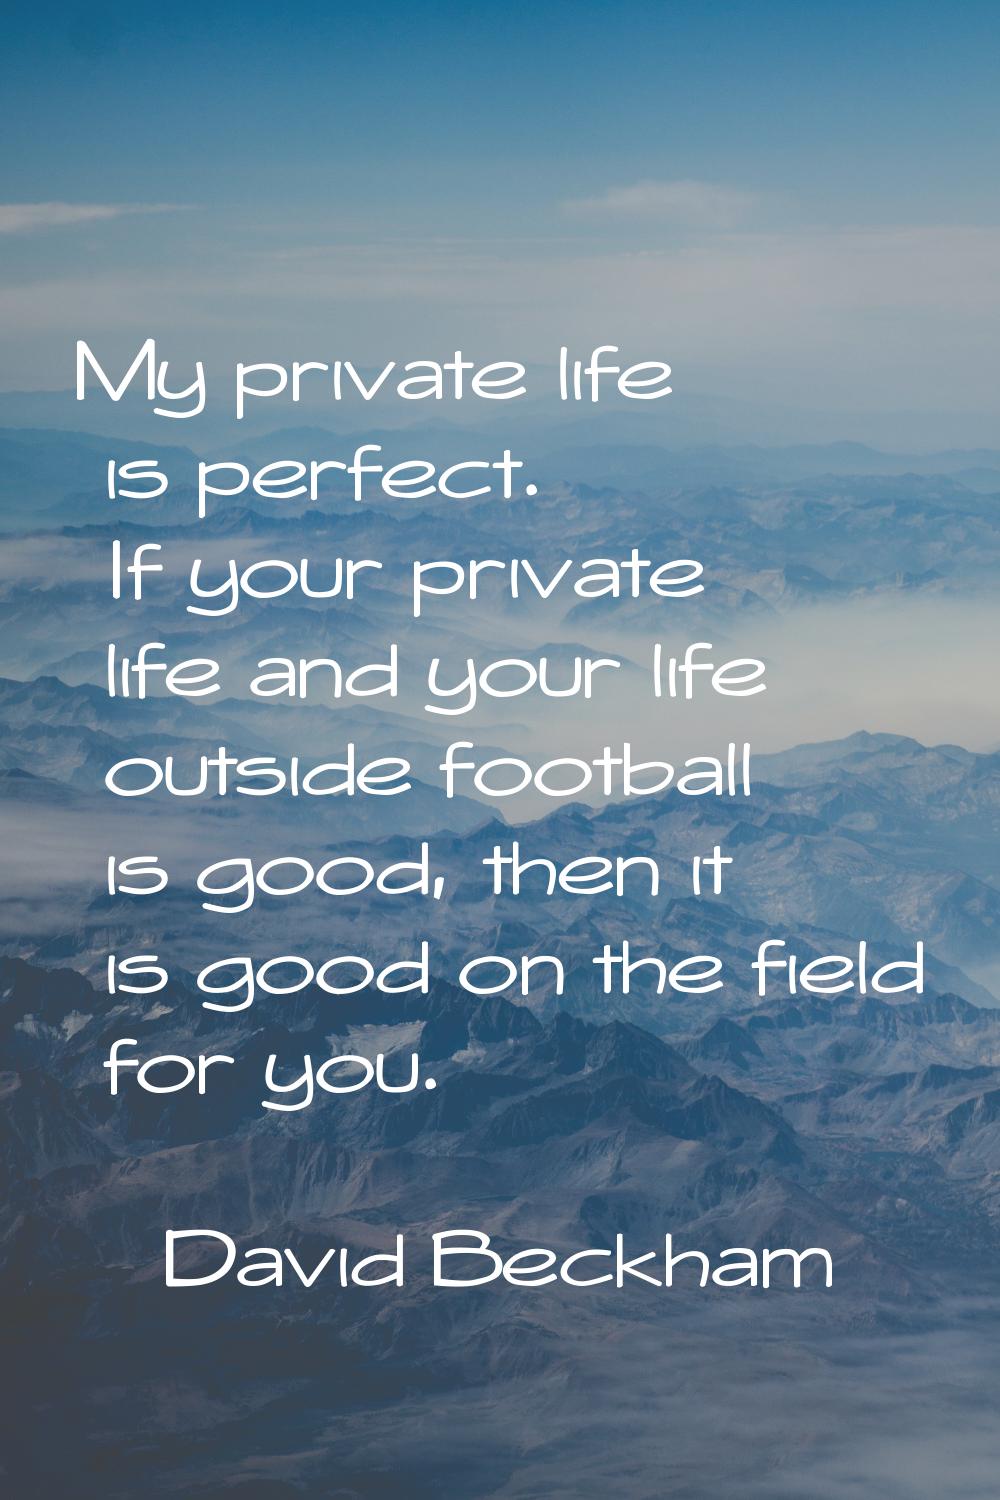 My private life is perfect. If your private life and your life outside football is good, then it is